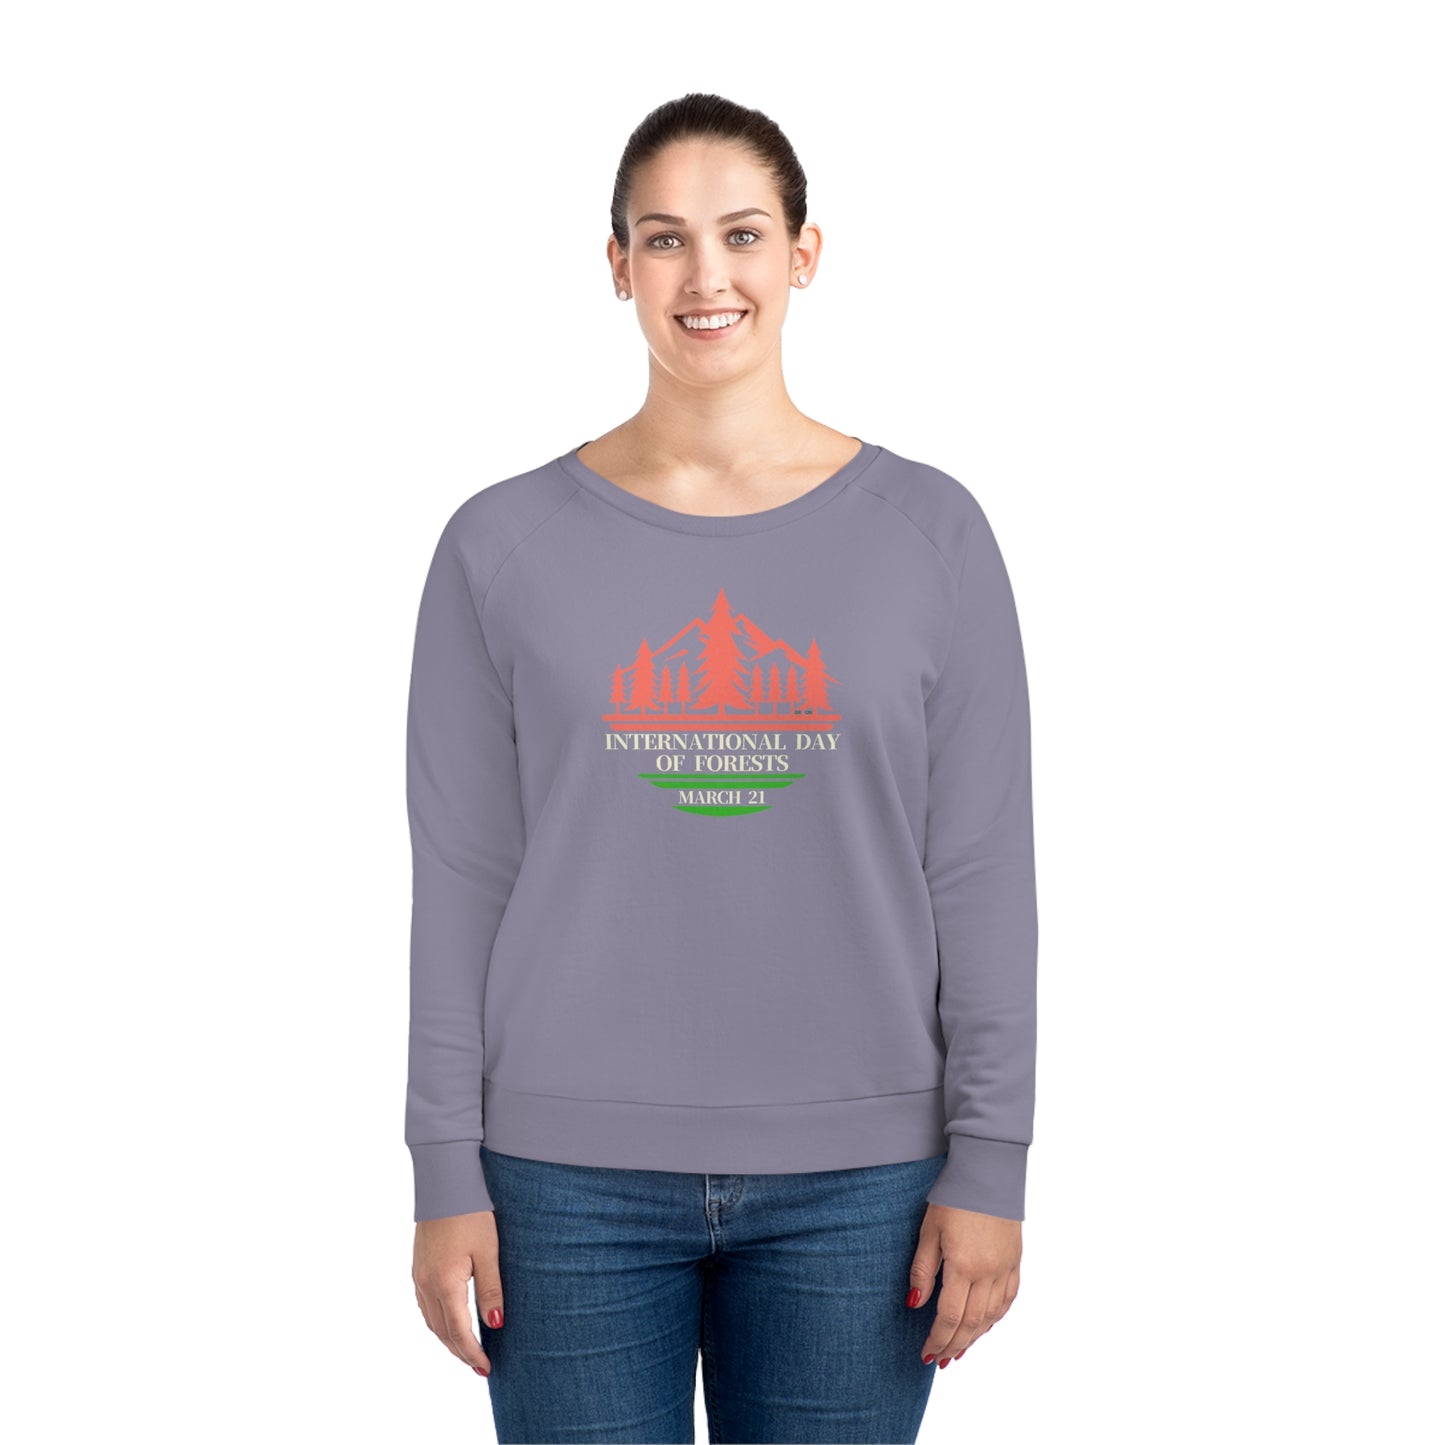 International Day of Forests, Model wearing a GR@ON Sweatshirt made from organic cotton, featuring a stylish and sustainable design. GR@ON Sweatshirts: Sustainable comfort, everyday style.